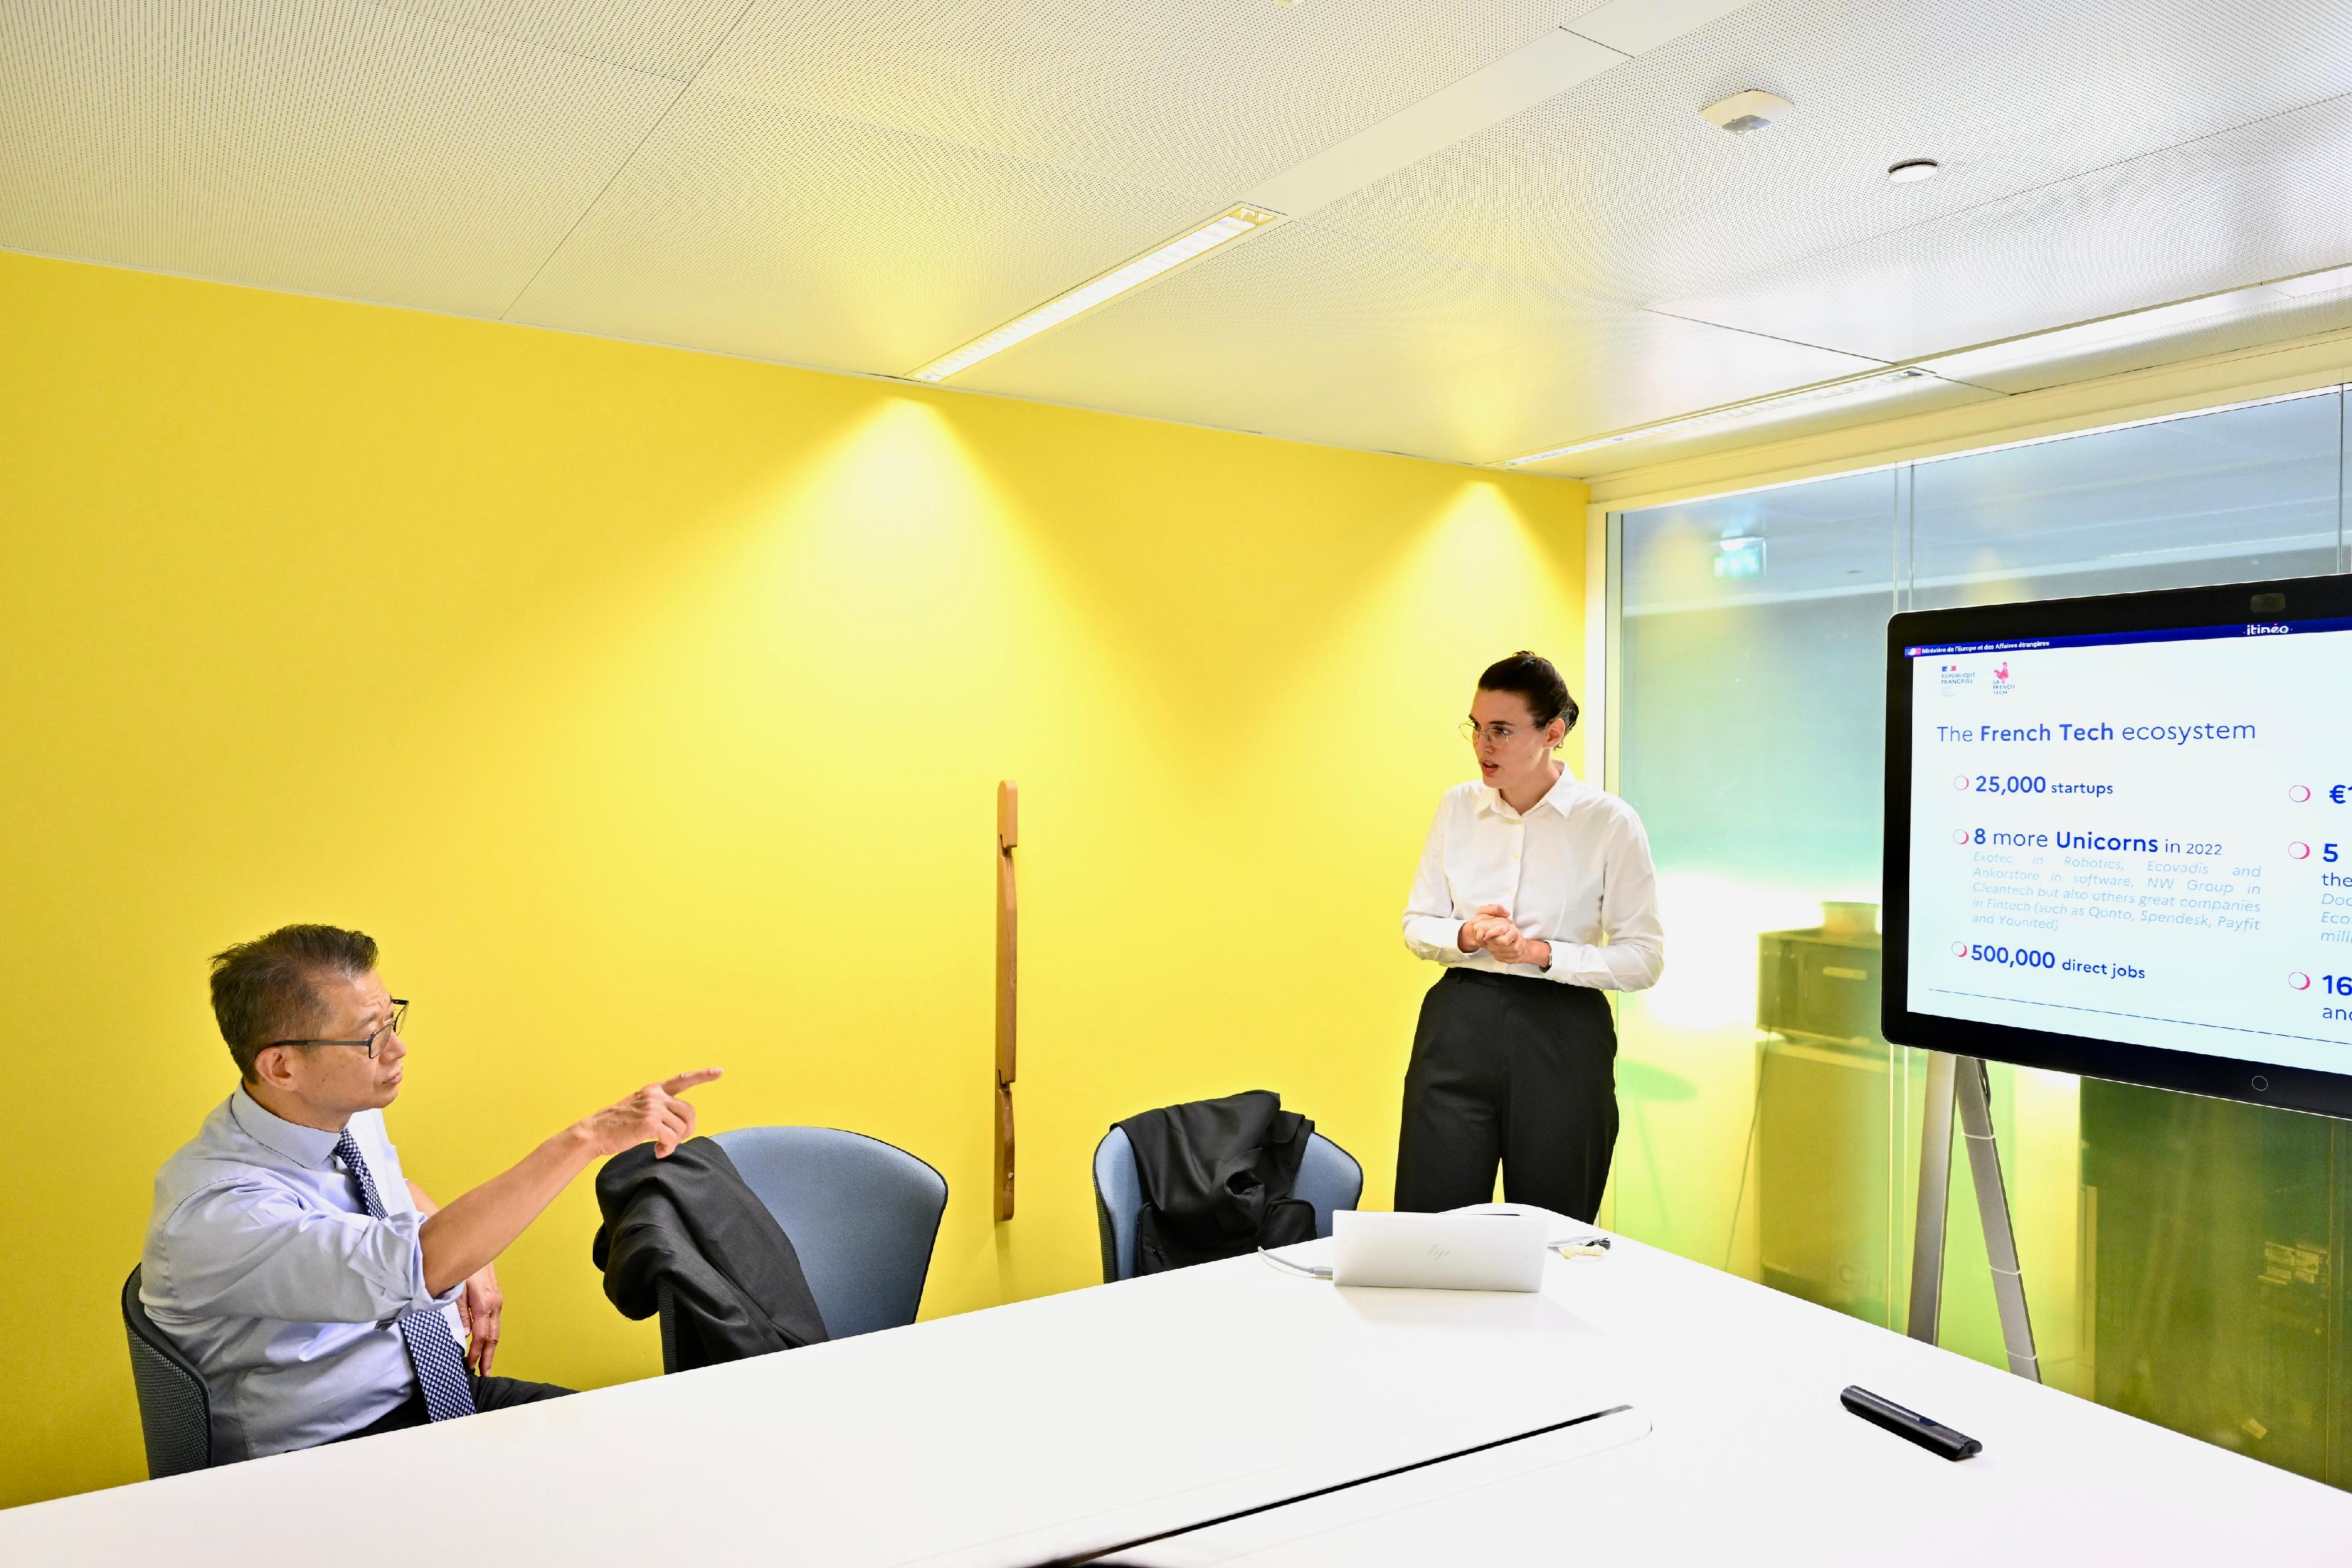 The Financial Secretary, Mr Paul Chan, visited Station F, a start-up campus in Paris yesterday (September 18, Paris time); and met with representatives of La French Tech, France's start-up scene, to understand the policies and work undertaken by the country in nurturing its start-up ecosystem. Photo shows Mr Chan (left) exchanging views on start-up development with La French Tech's representative. 